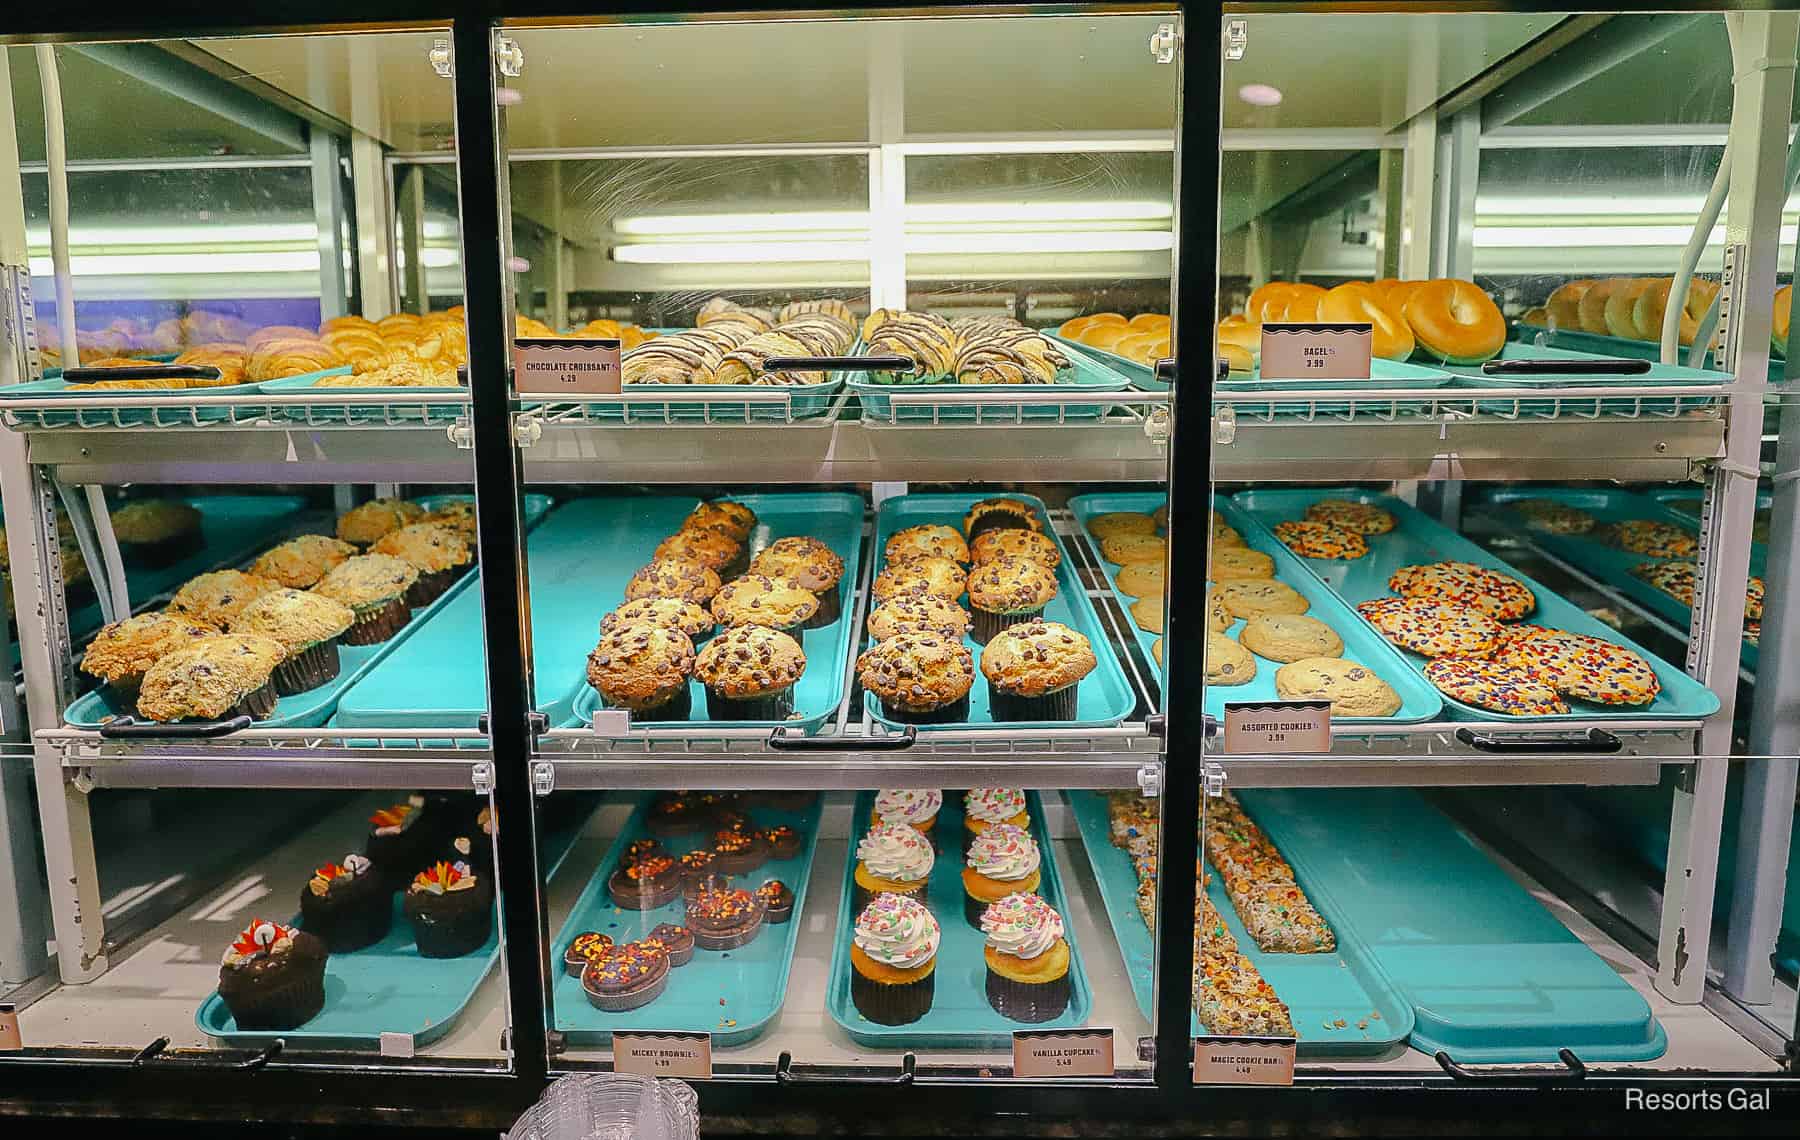 a case with muffins, cupcakes, donuts, and other pastries at Roaring Fork 